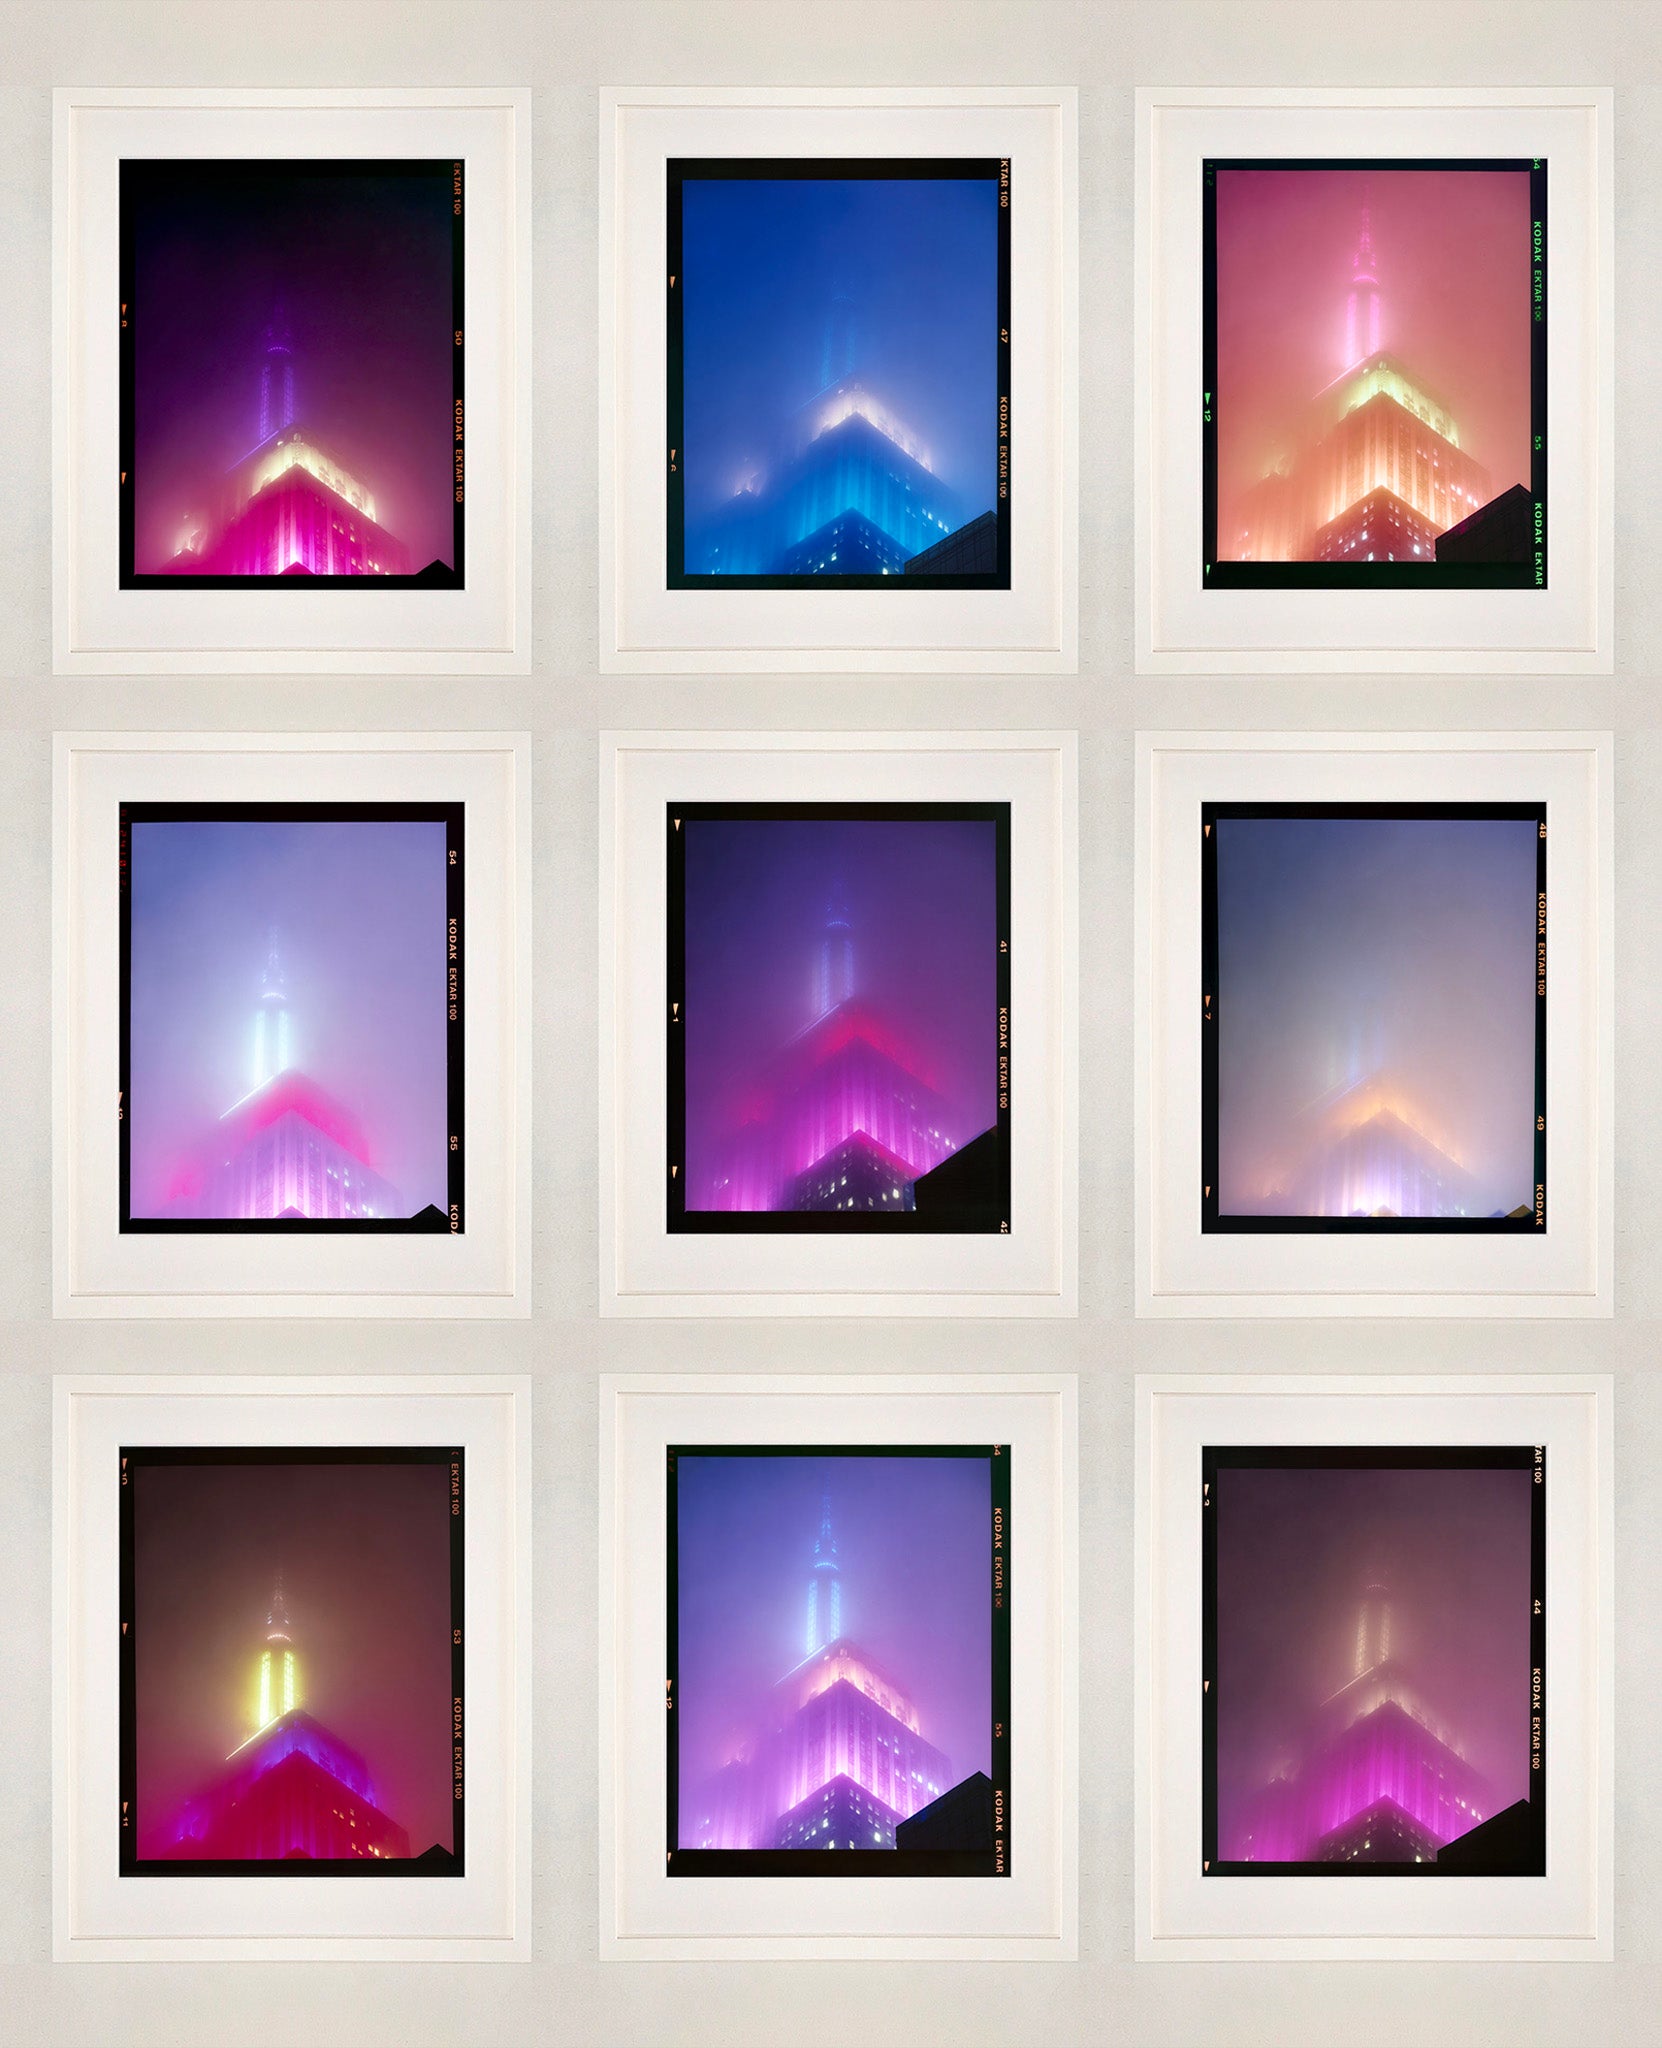 'NOMAD IX (Film Rebate)', New York. Richard Heeps has photographed the iconic Empire State building in the mist. The NOMAD sequence of photographs capture the art deco architecture illuminated by changing colours, and is part of Richard's street photography portfolio which depict the colour, fabric and structure of cities with distinct style. This 6x7 format edition is bordered by the Kodak film rebate. 